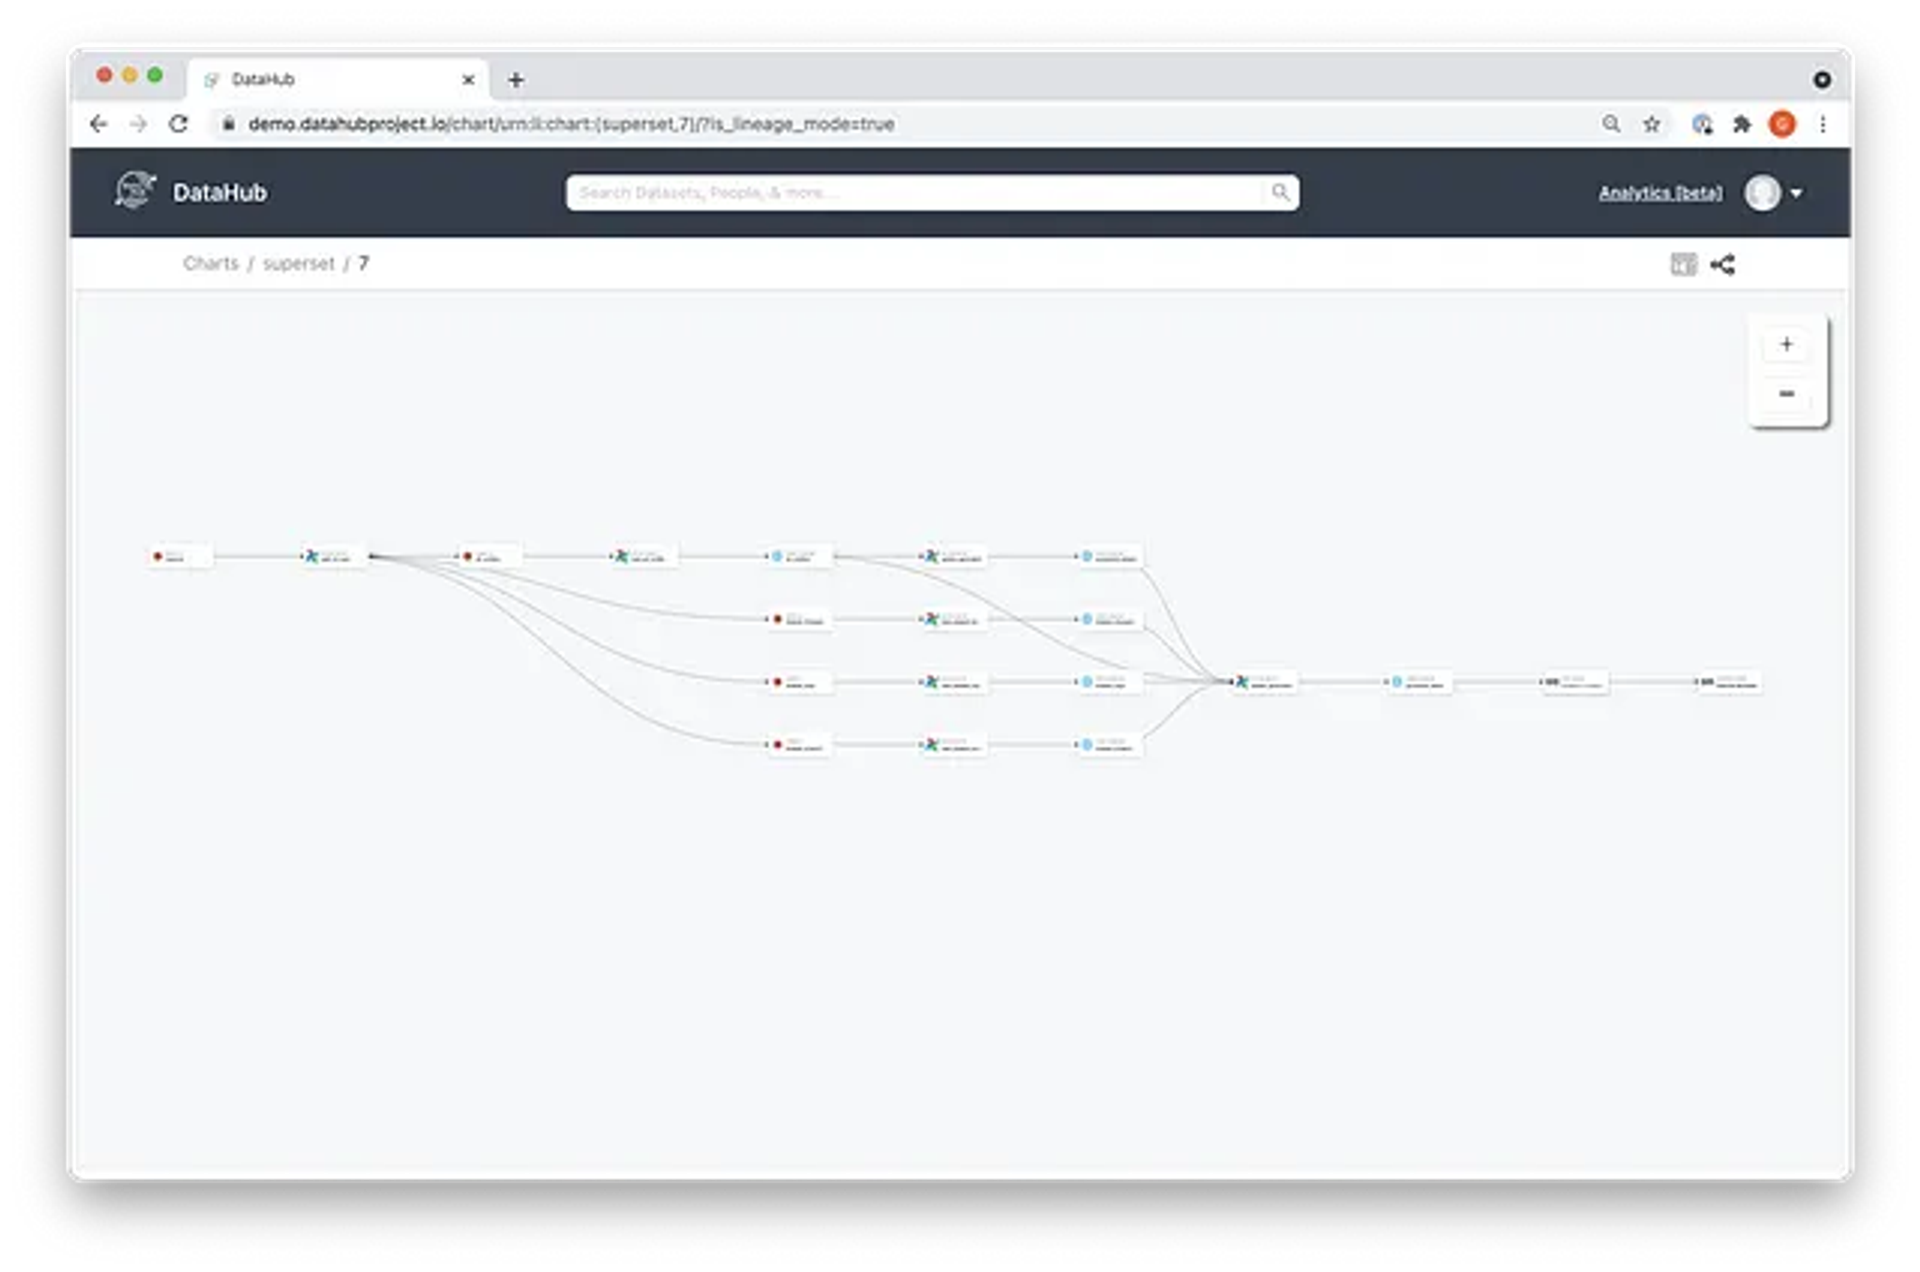 Use the Lineage Explorer to understand how a data product was created